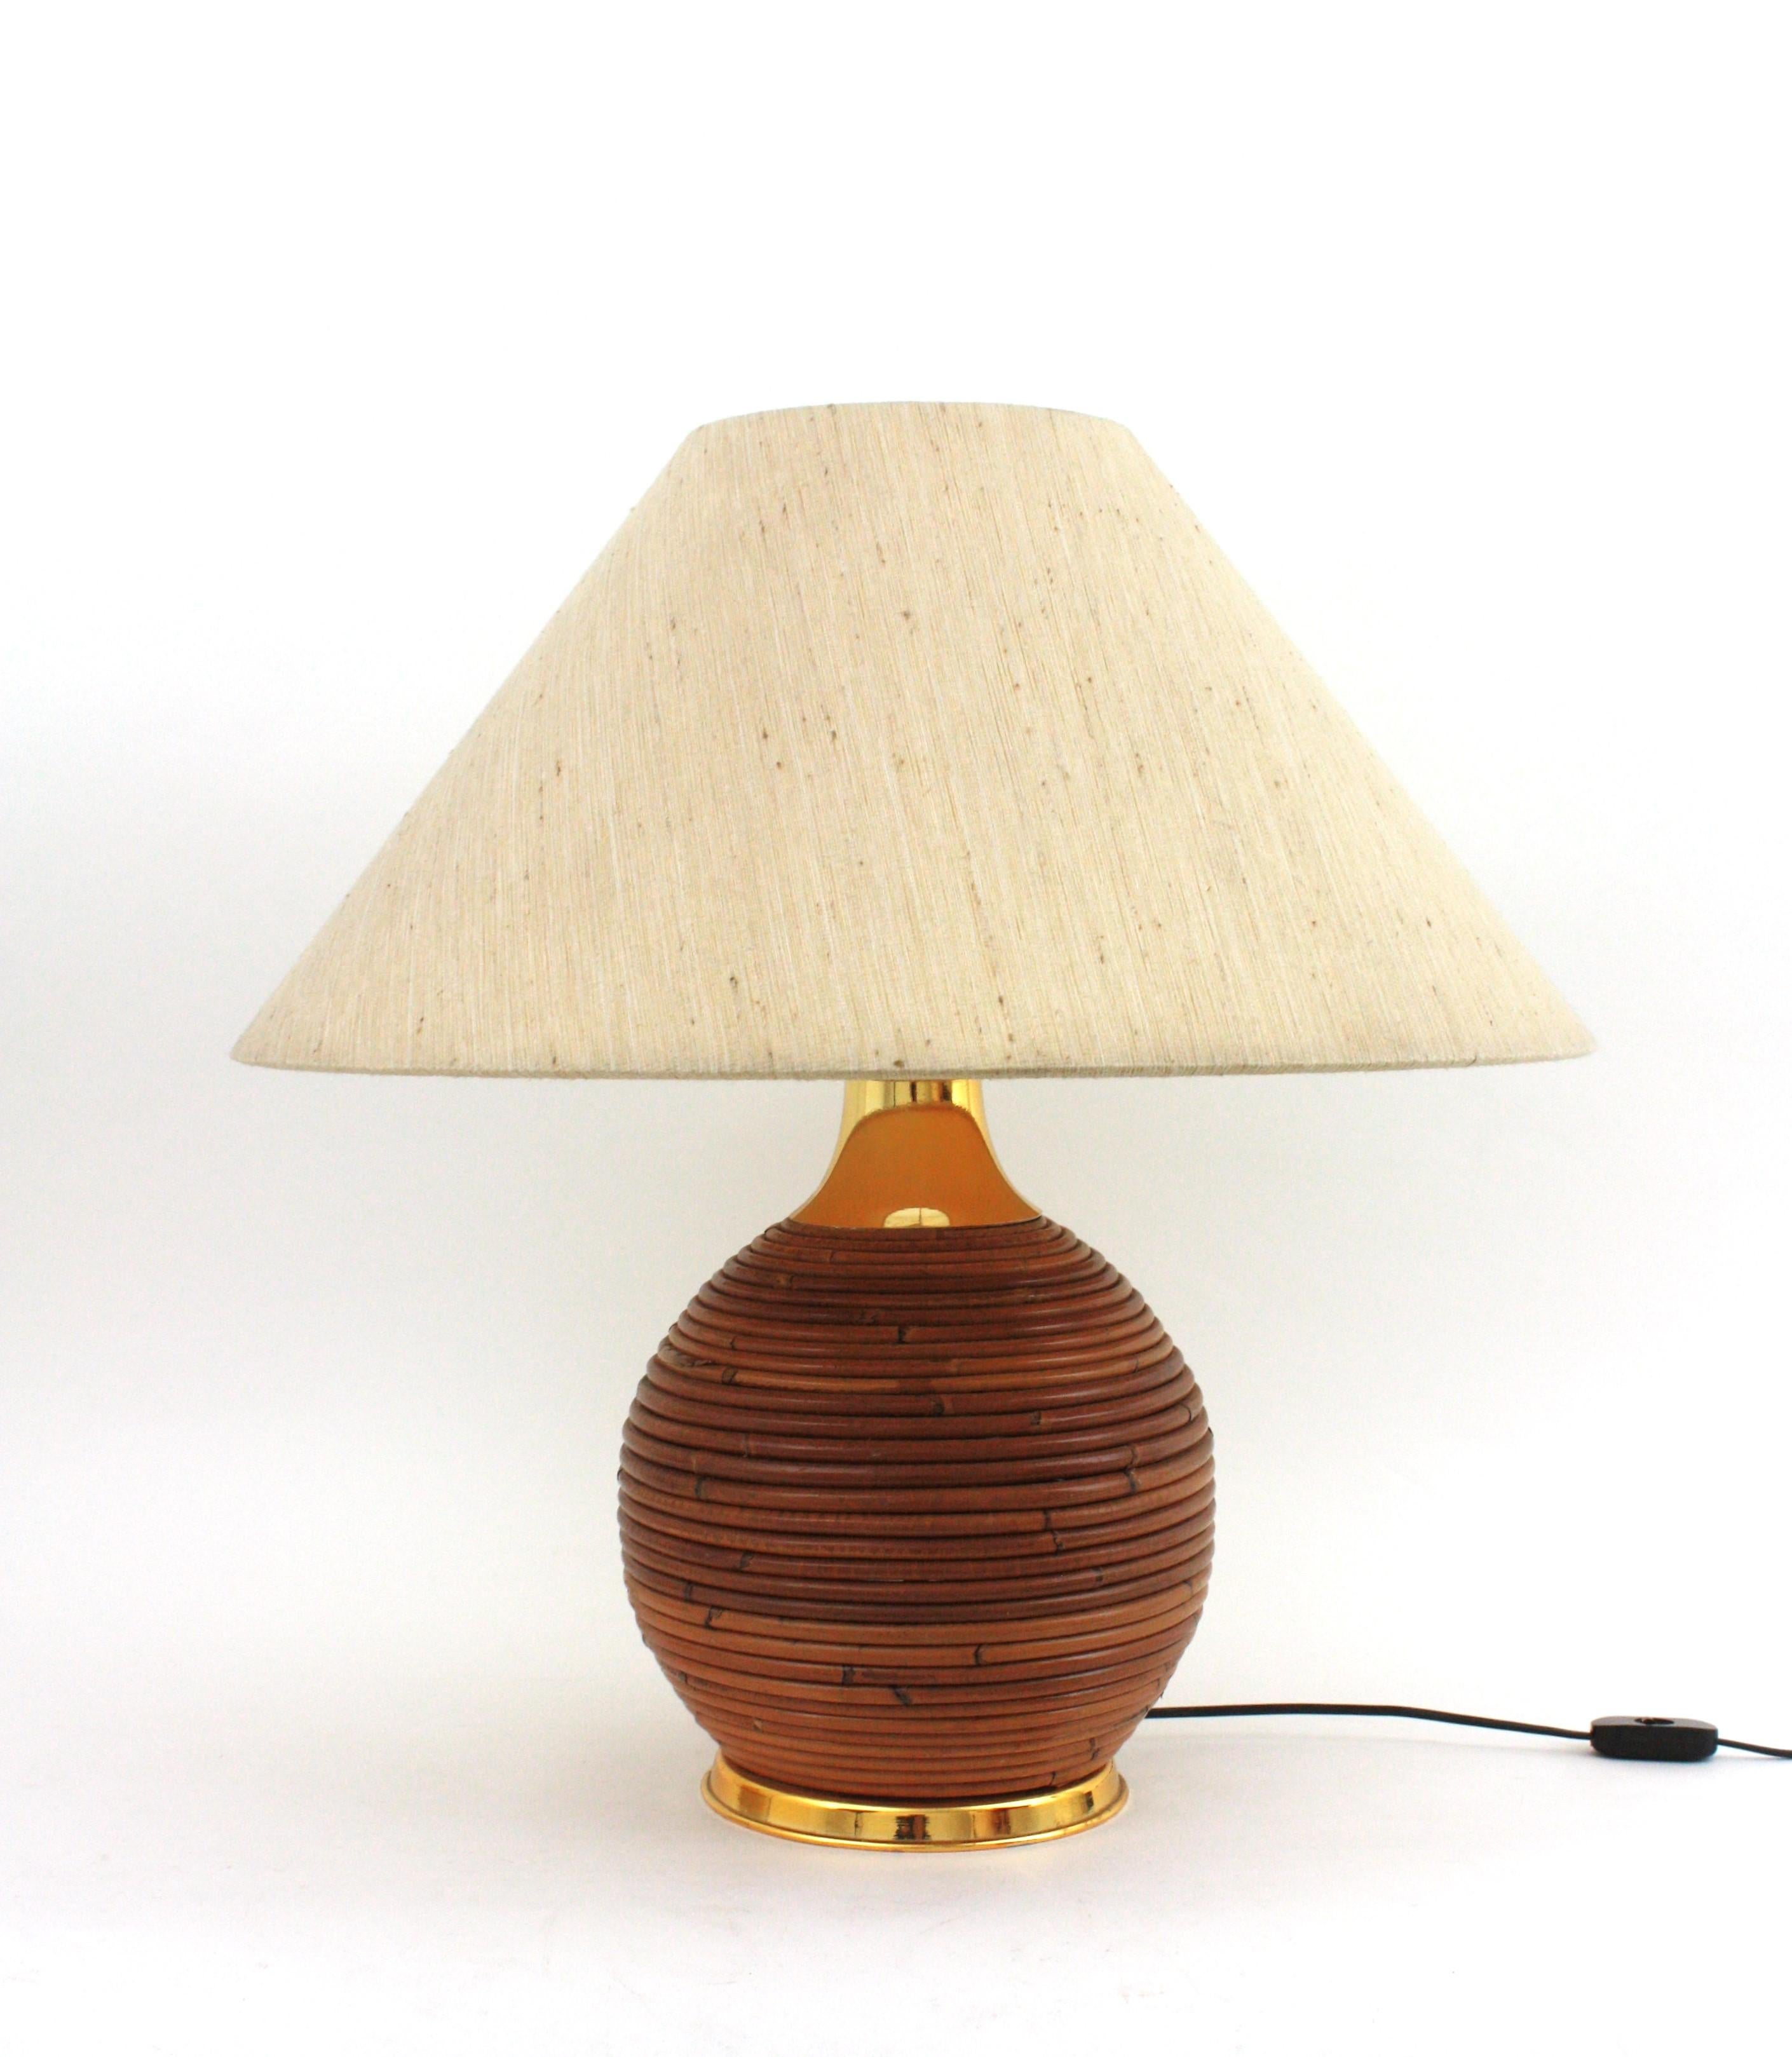 Large Italian Rattan and Brass Ball Table Lamp, 1970s For Sale 2